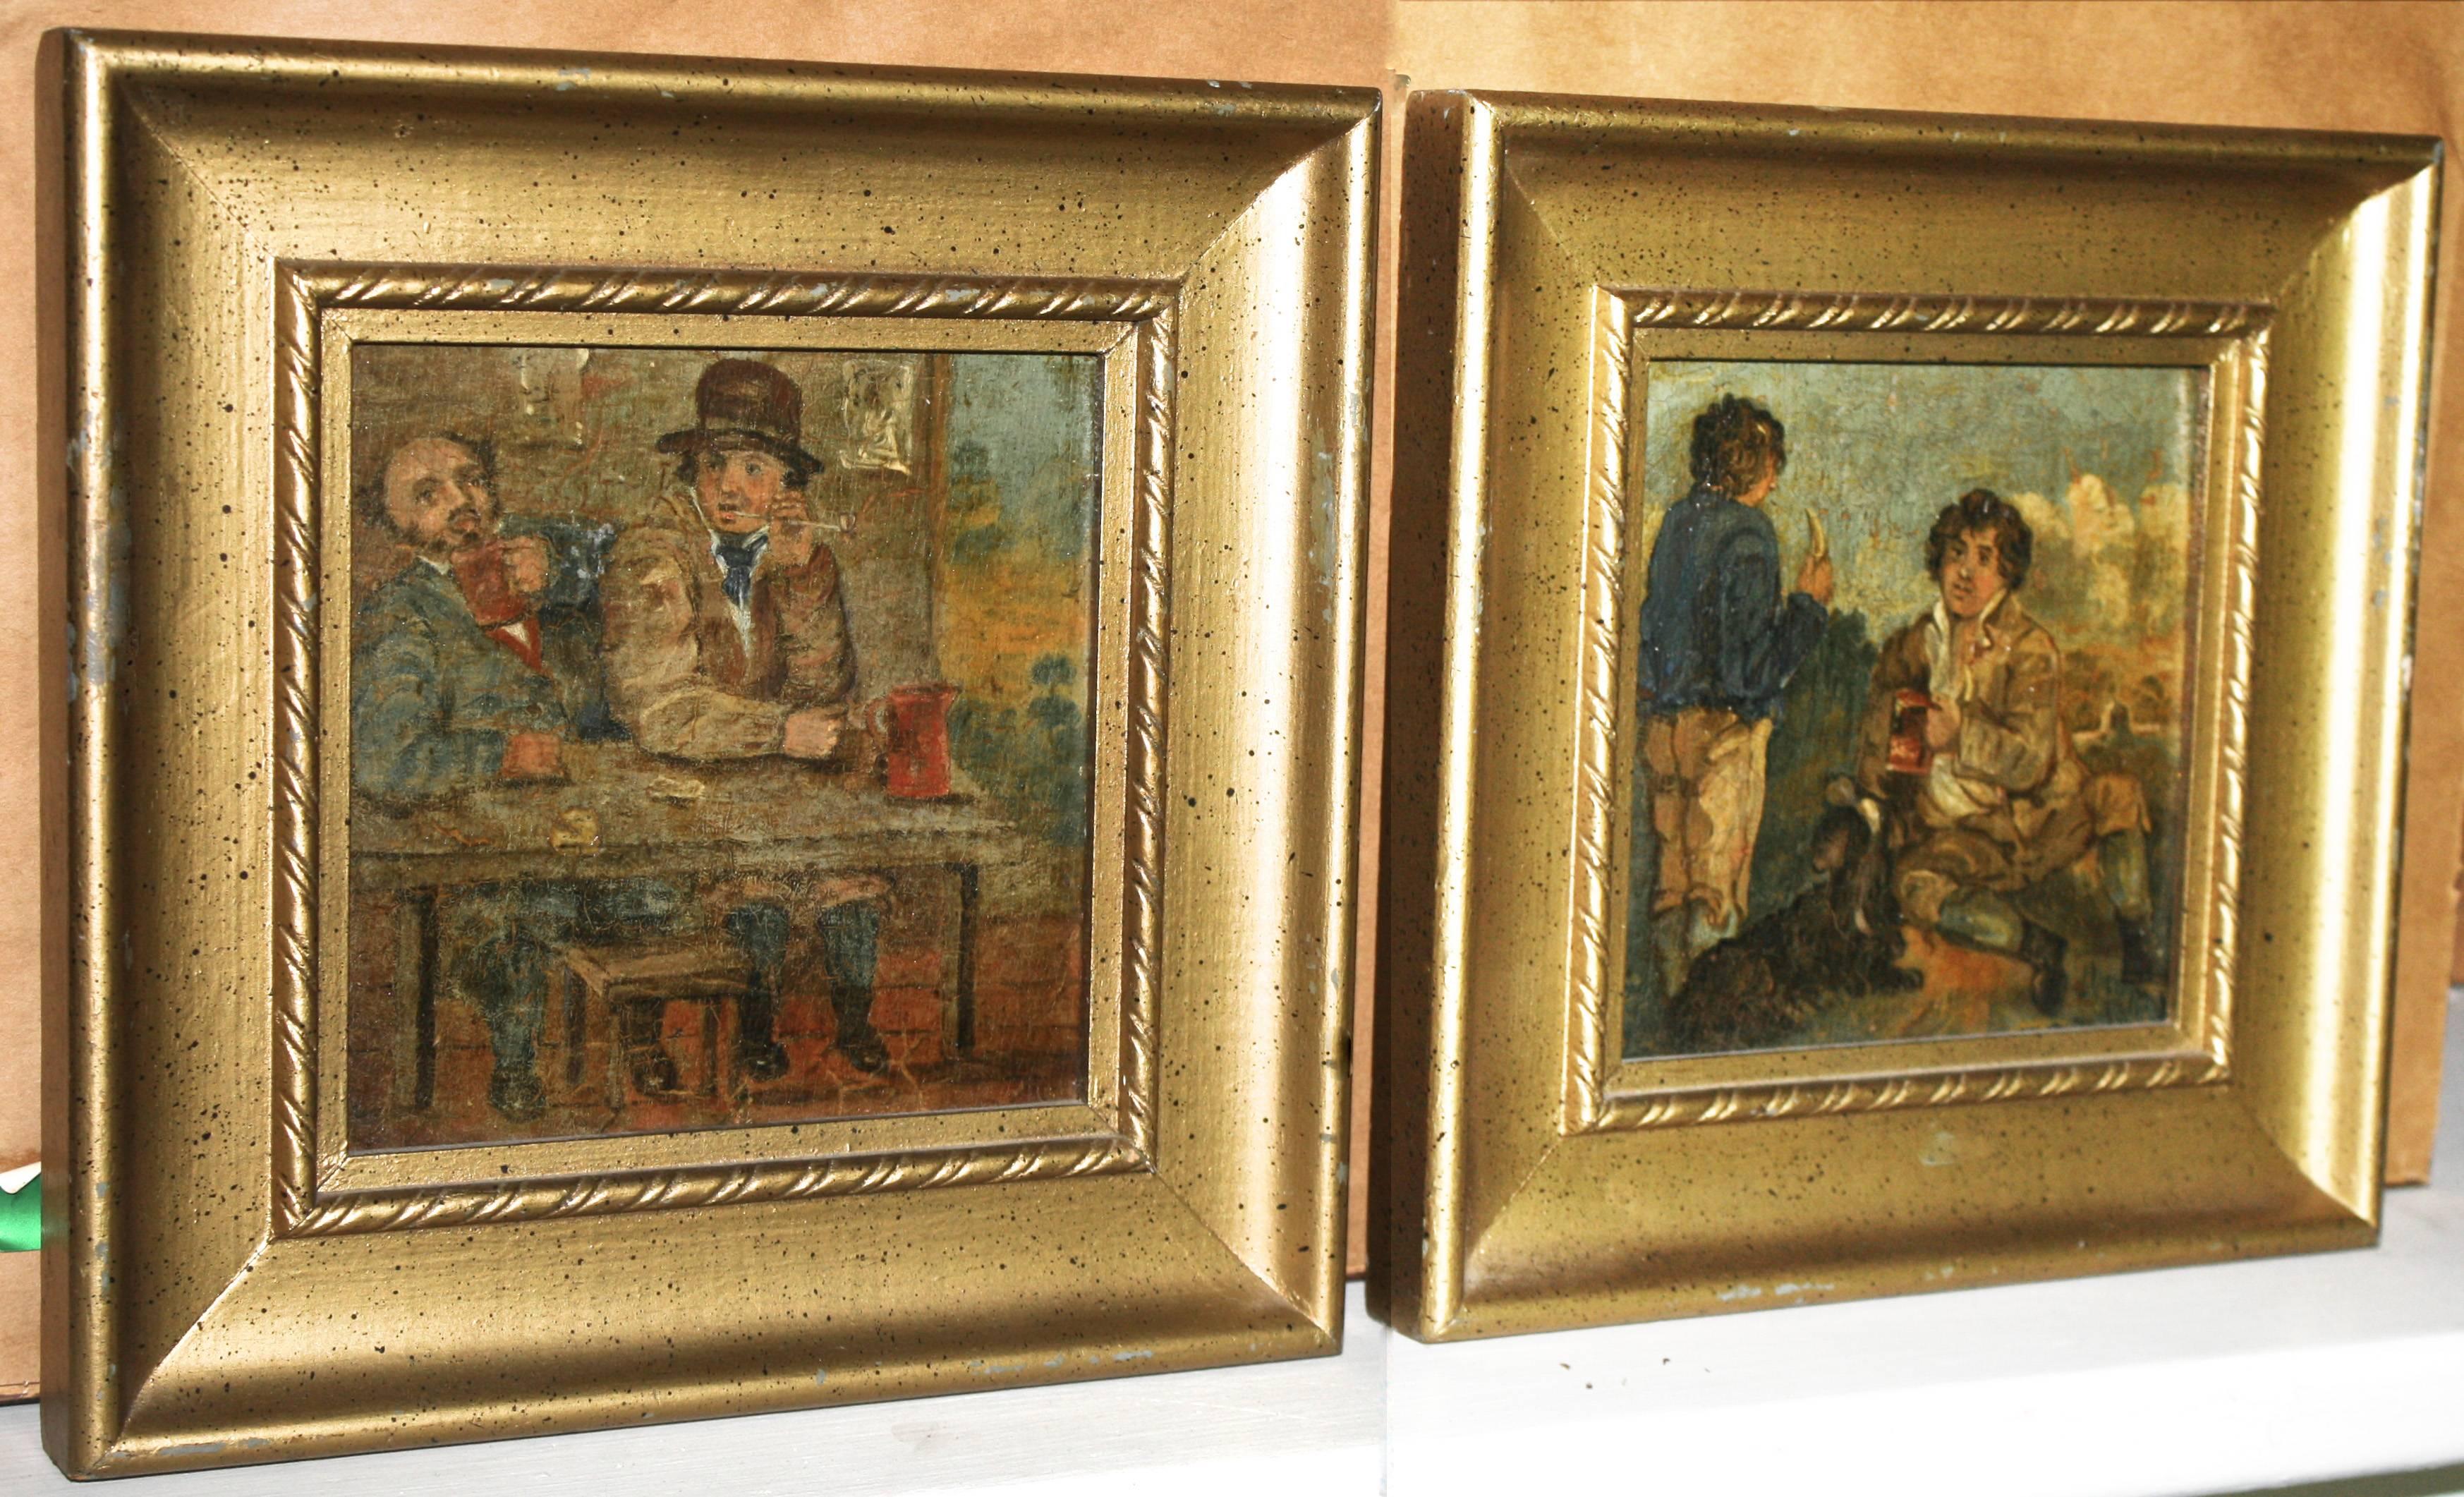 A pair of small 6 inches x 6 inches unsigned oil on board paintings of the same fellow drinking with two different friends. Rappaport, hand printed in chalk, appears on the rear of each frame. Ex: a Litchfield County, Connecticut collection of